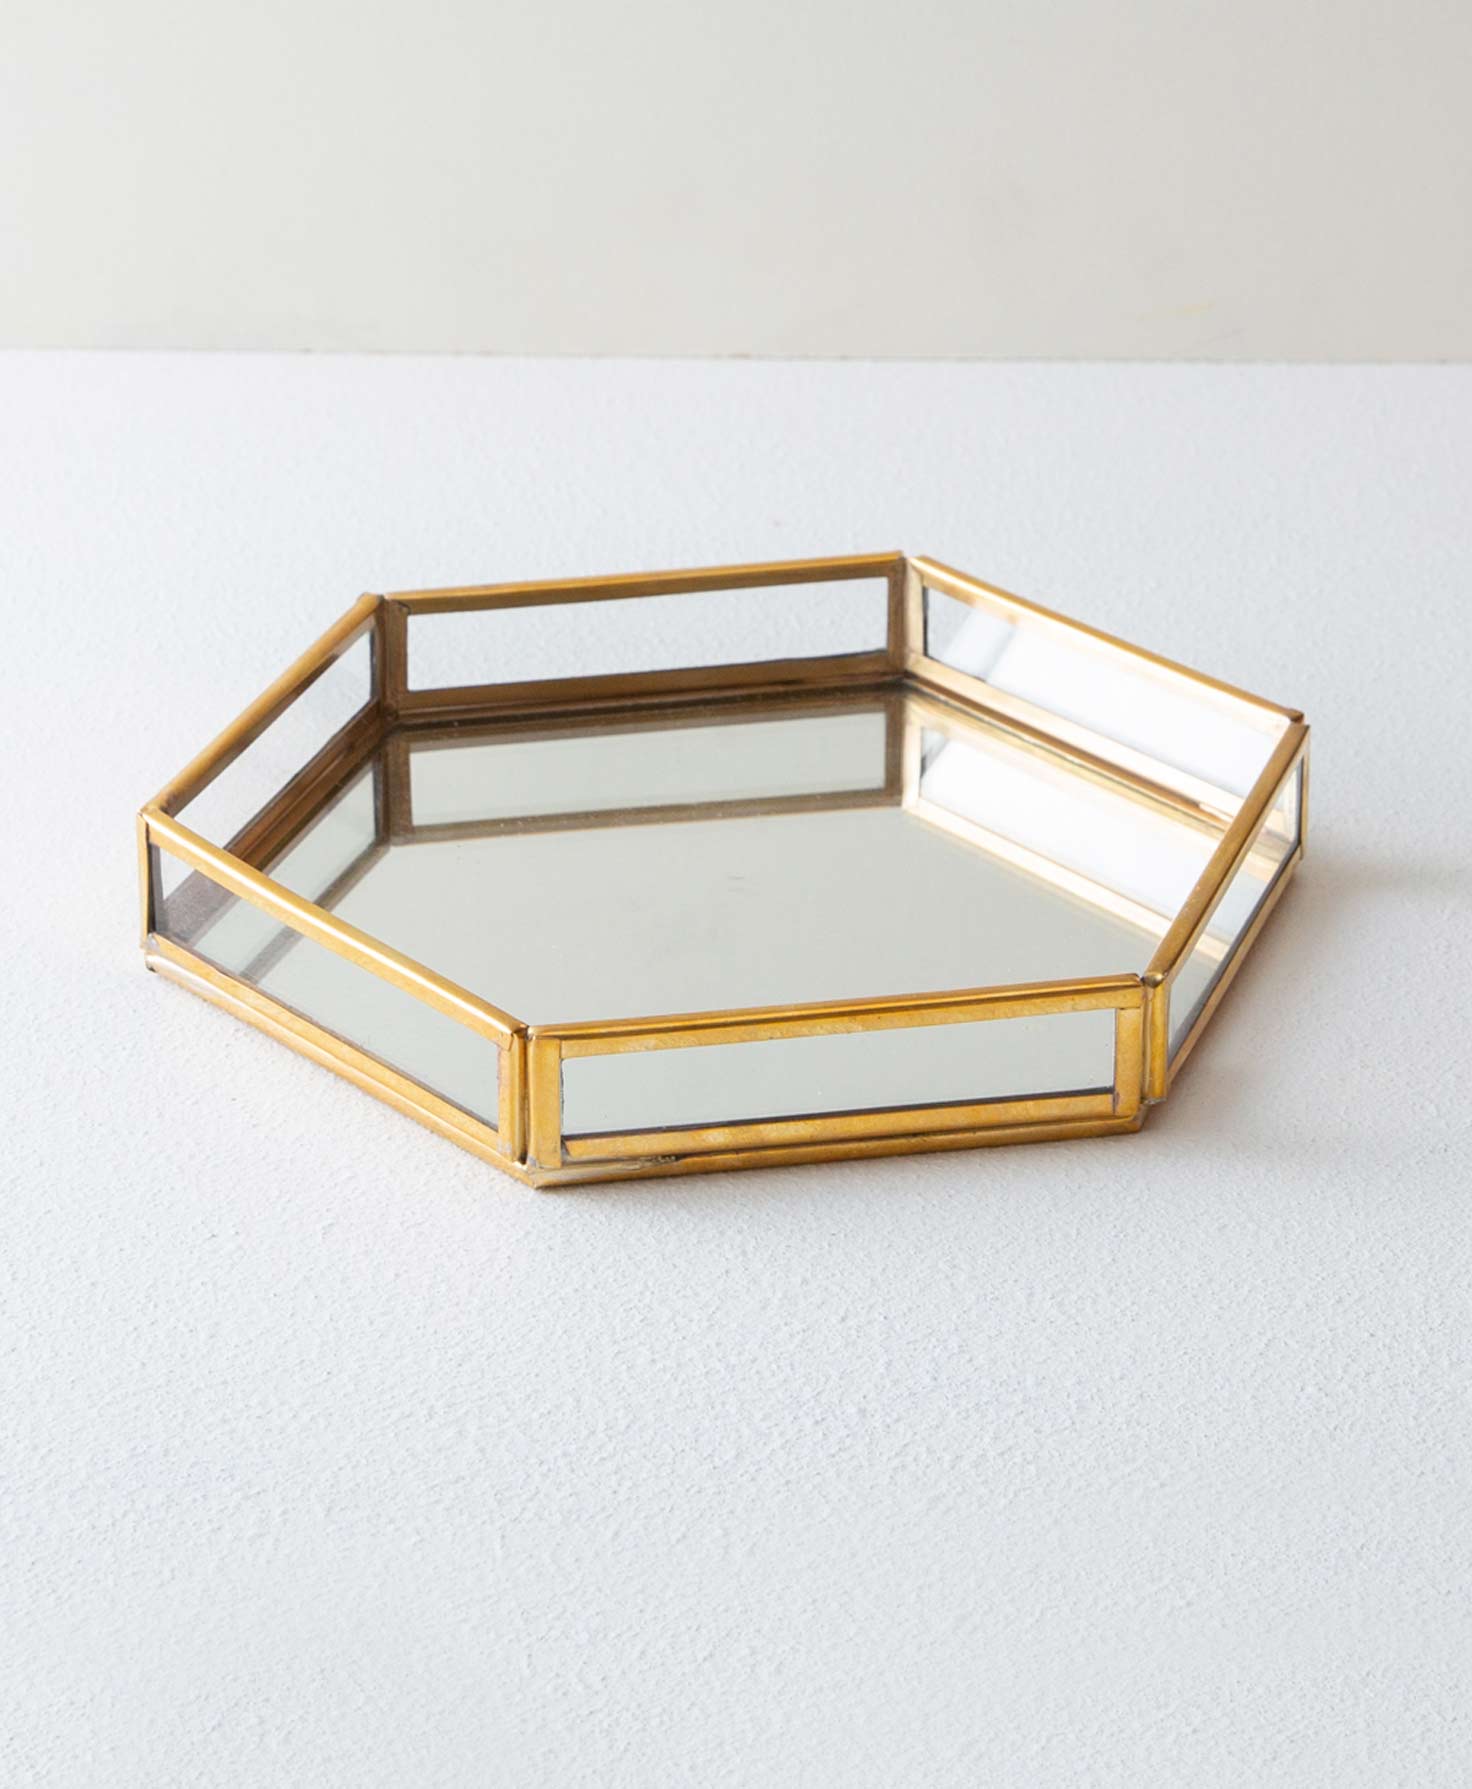 The Brass and Glass Hexagonal Tray sits on a white surface. It has six low sides composed of a rectangular glass panels framed in shining brass. The base of the tray is a hexagon made of mirrored glass.